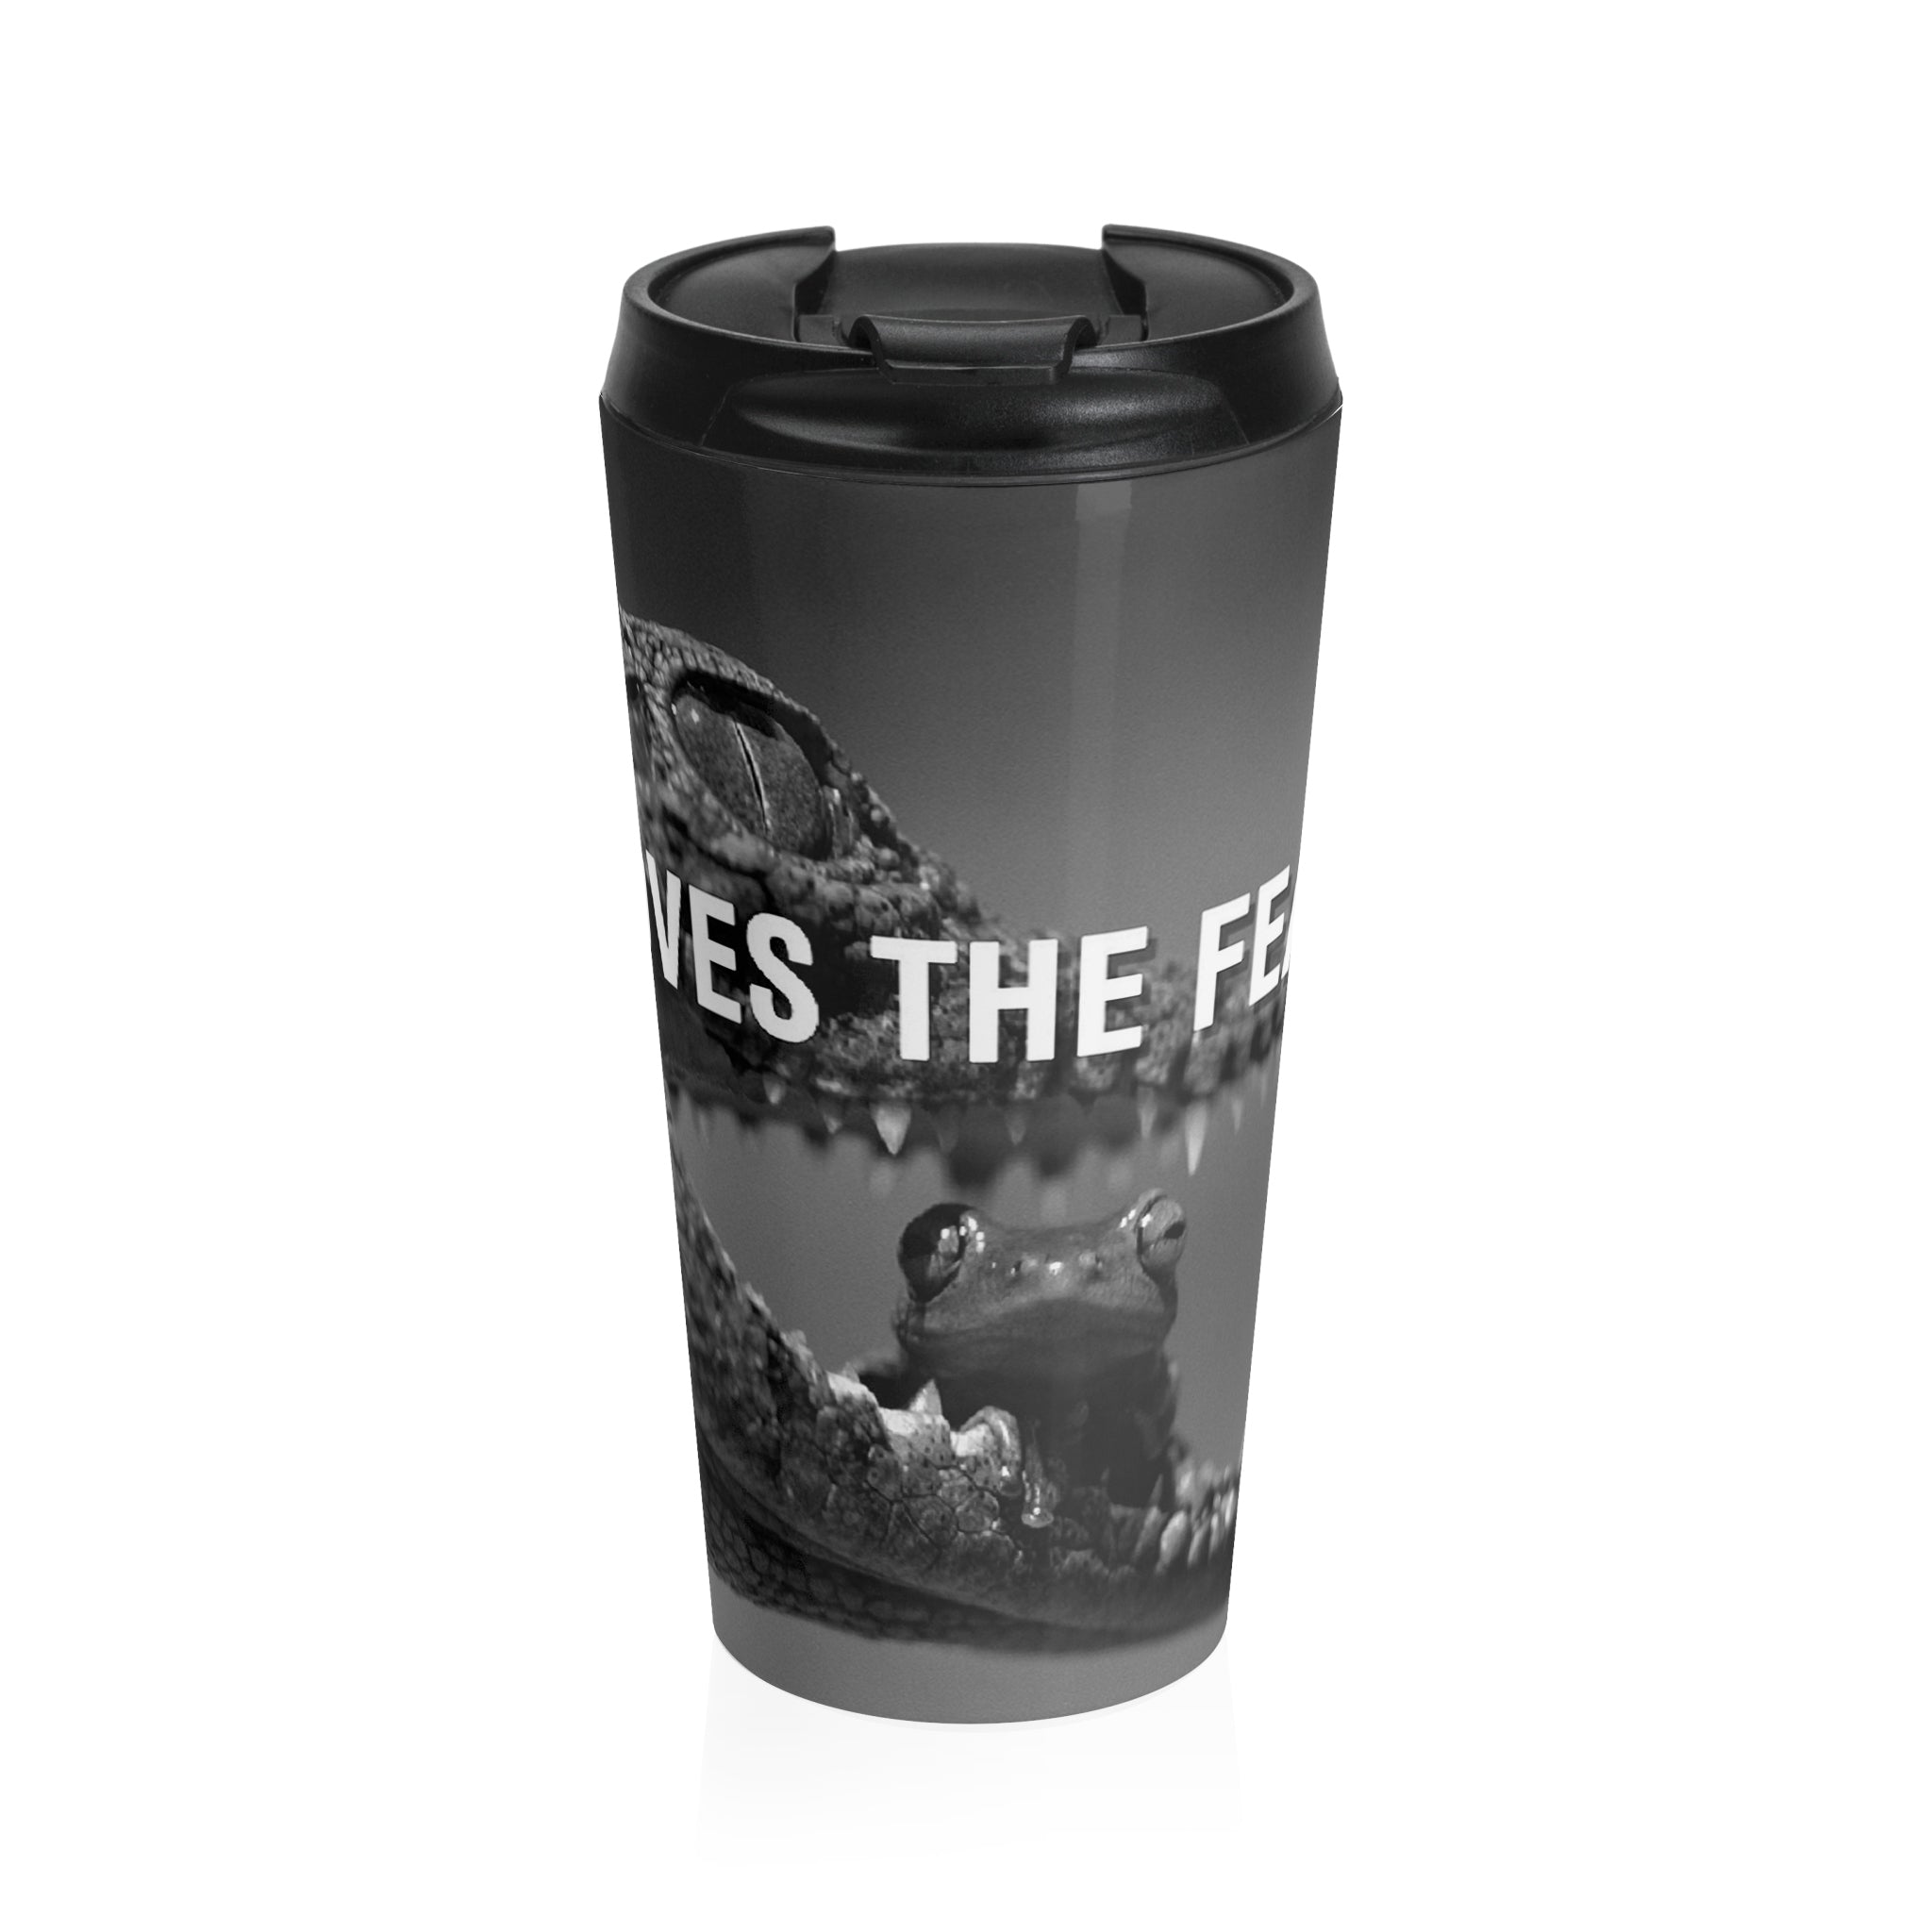 Fate loves the fearless Quote Stainless Steel Travel Mug